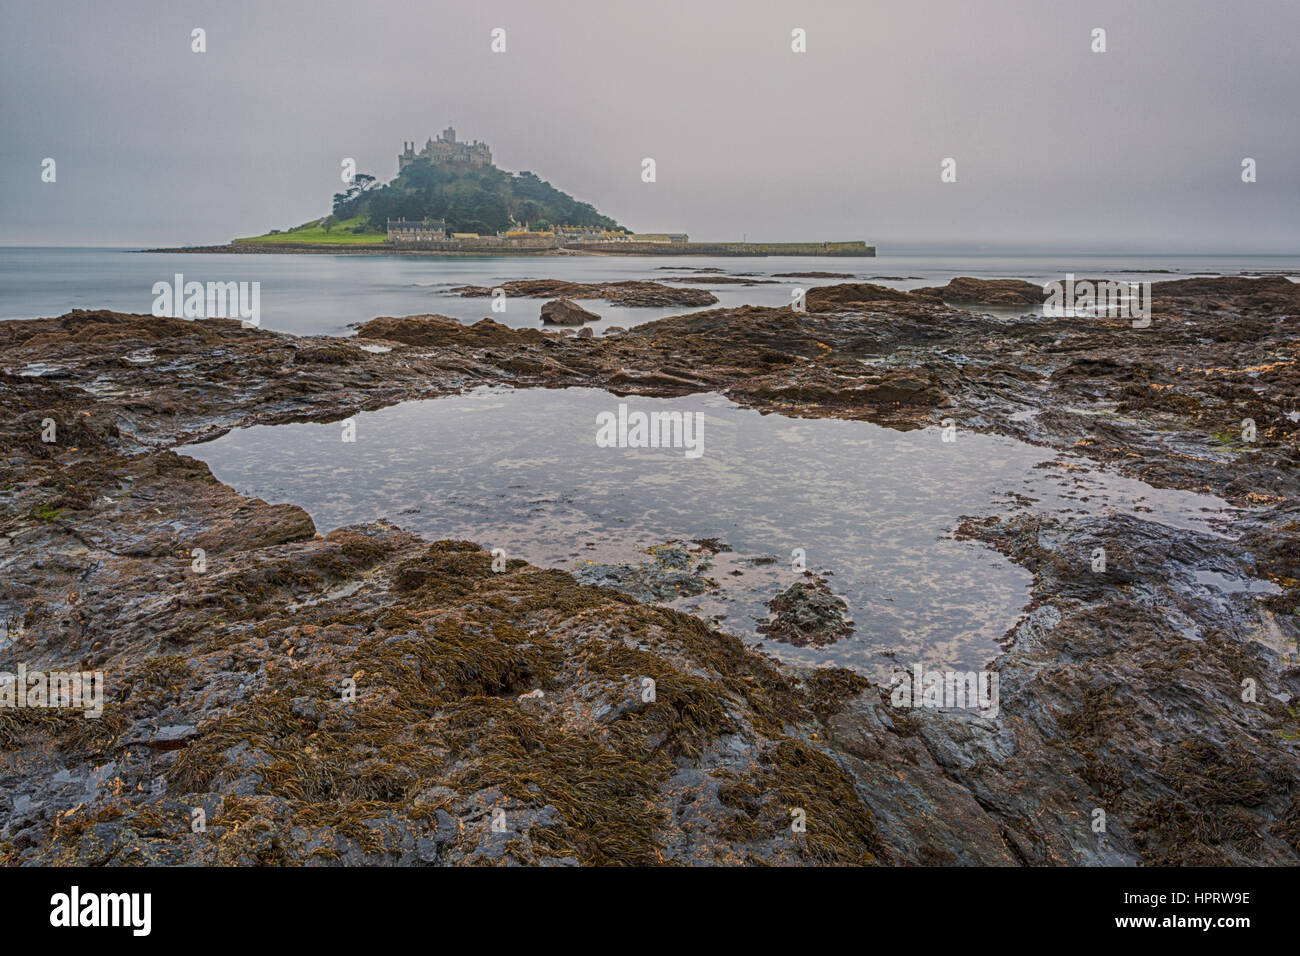 Dawn shot on misty morning with long exposure of St Michael's Mount with rock pool in foreground, West Cornwall, England, UK in February Stock Photo